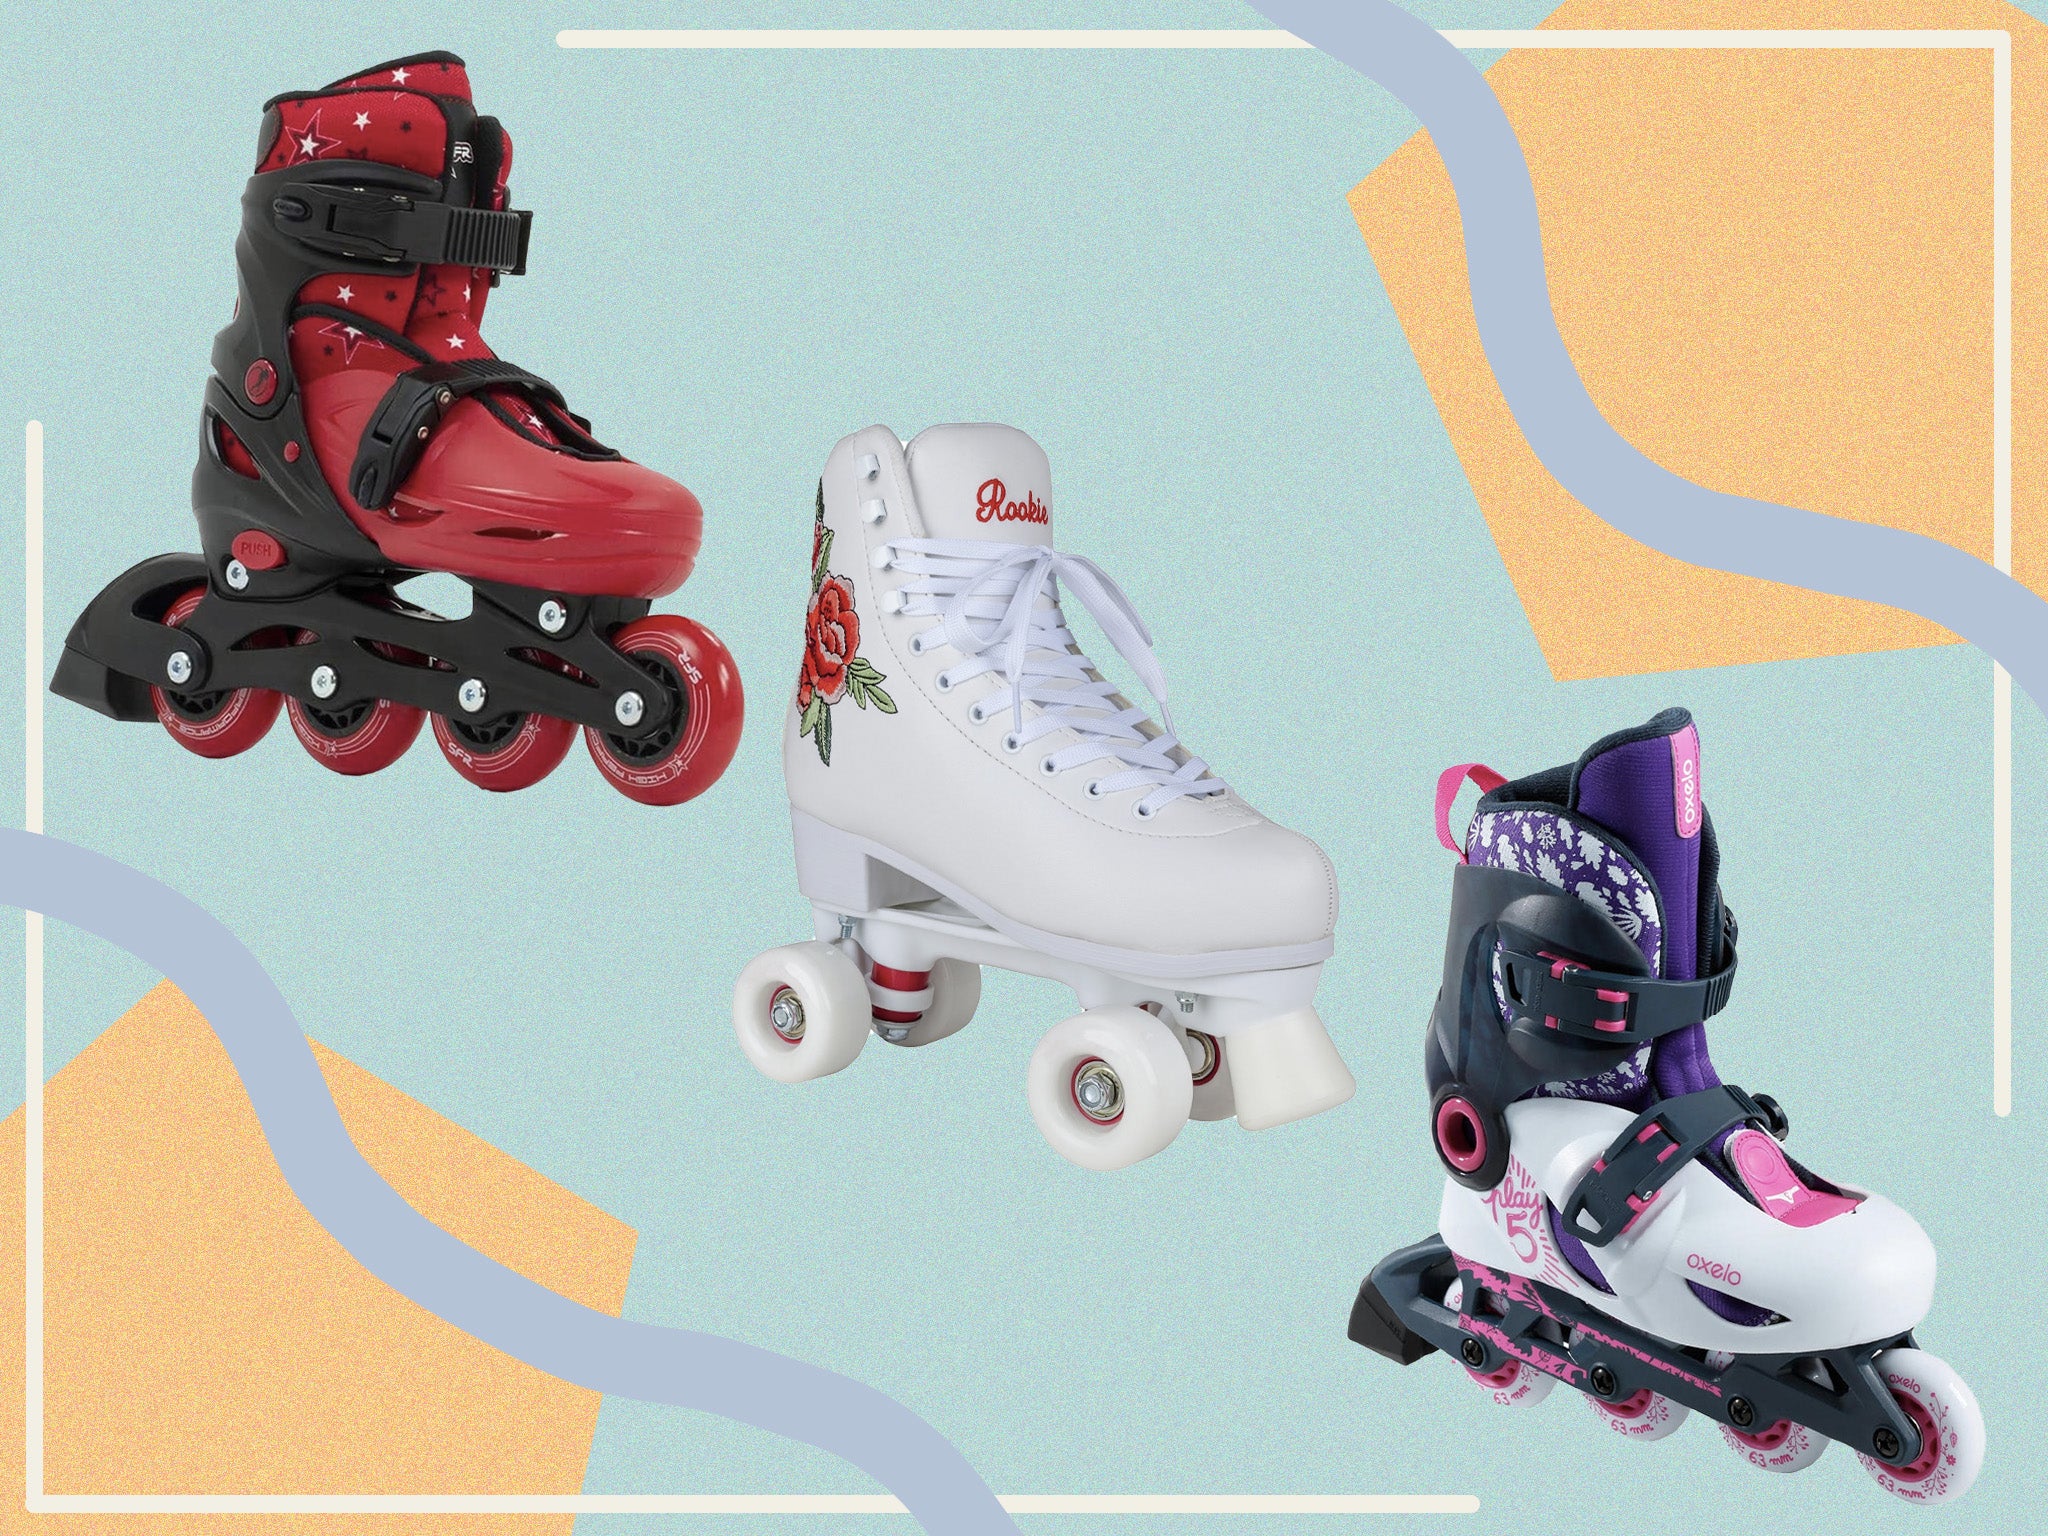 New Bounce Premium Roller Skate by 4 Wheel Inline Rollerblades for Kids Pink Or Blue Outdoor Skating for Beginners & Advanced 